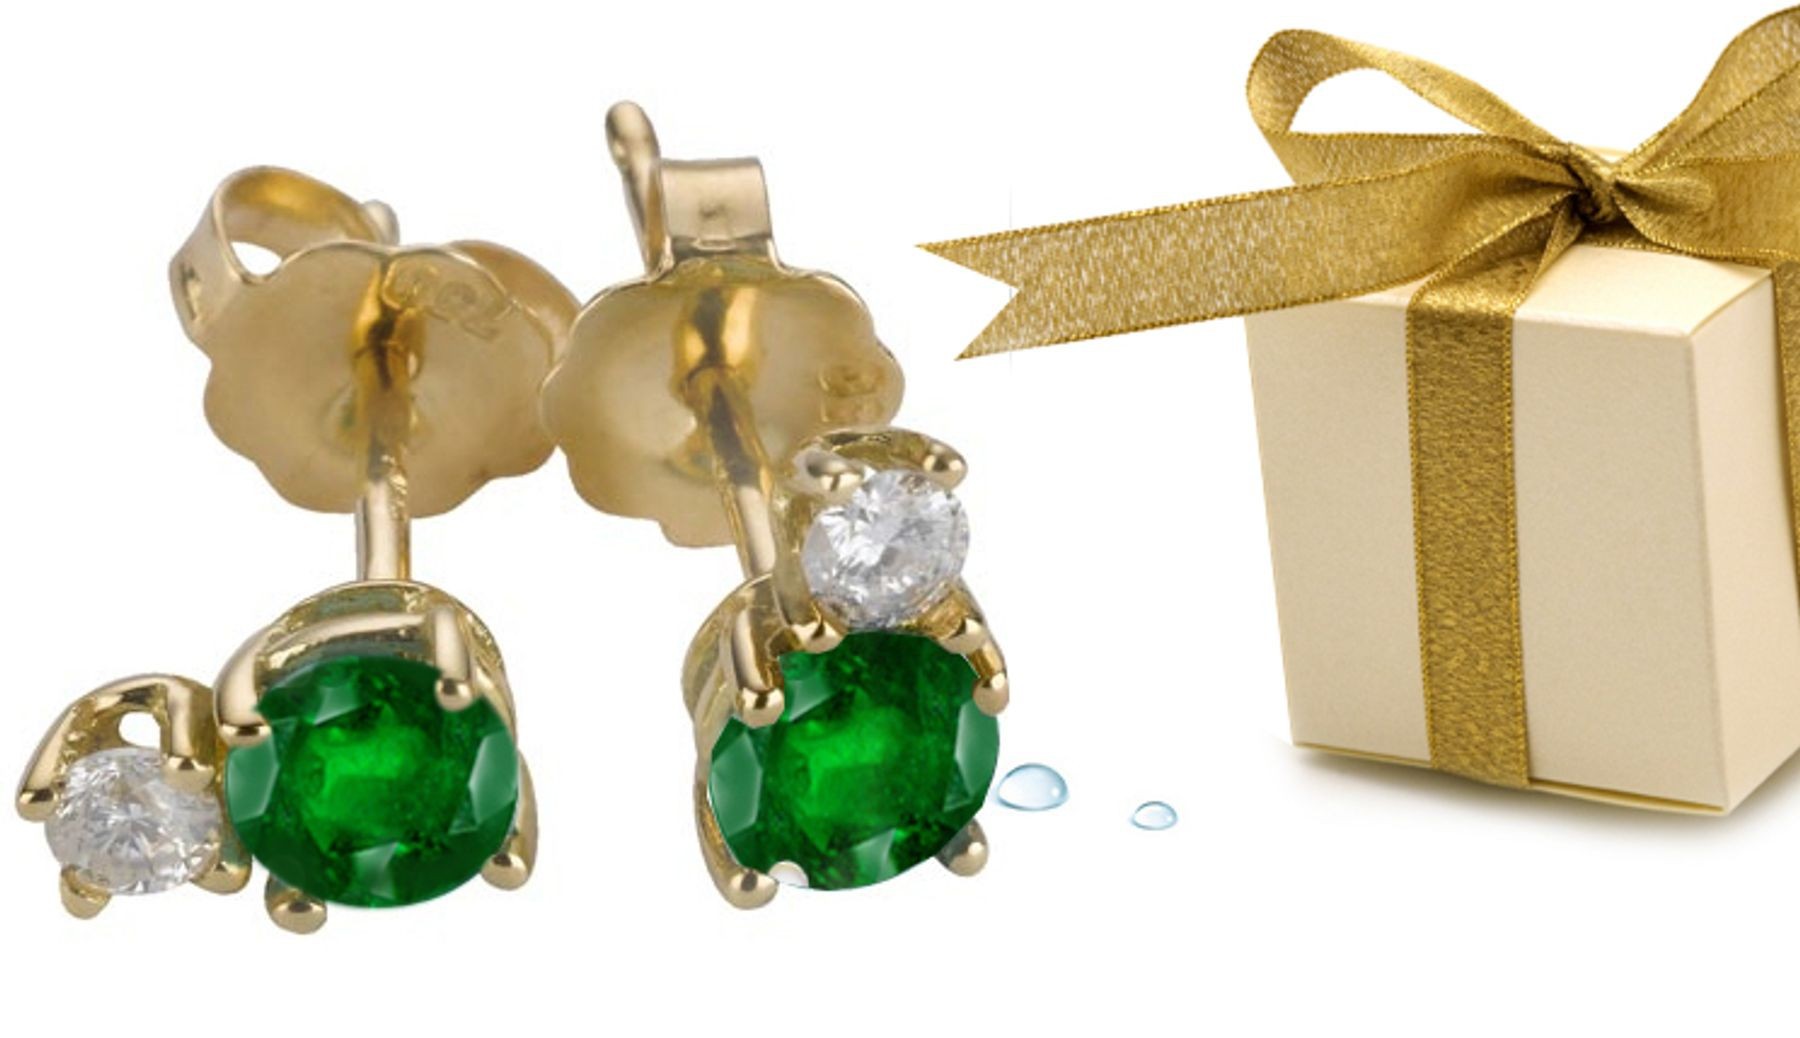 Emerald Earrings: Platinum & Gold Emerald Diamond Earrings Available in Platinum or Gold Settings.